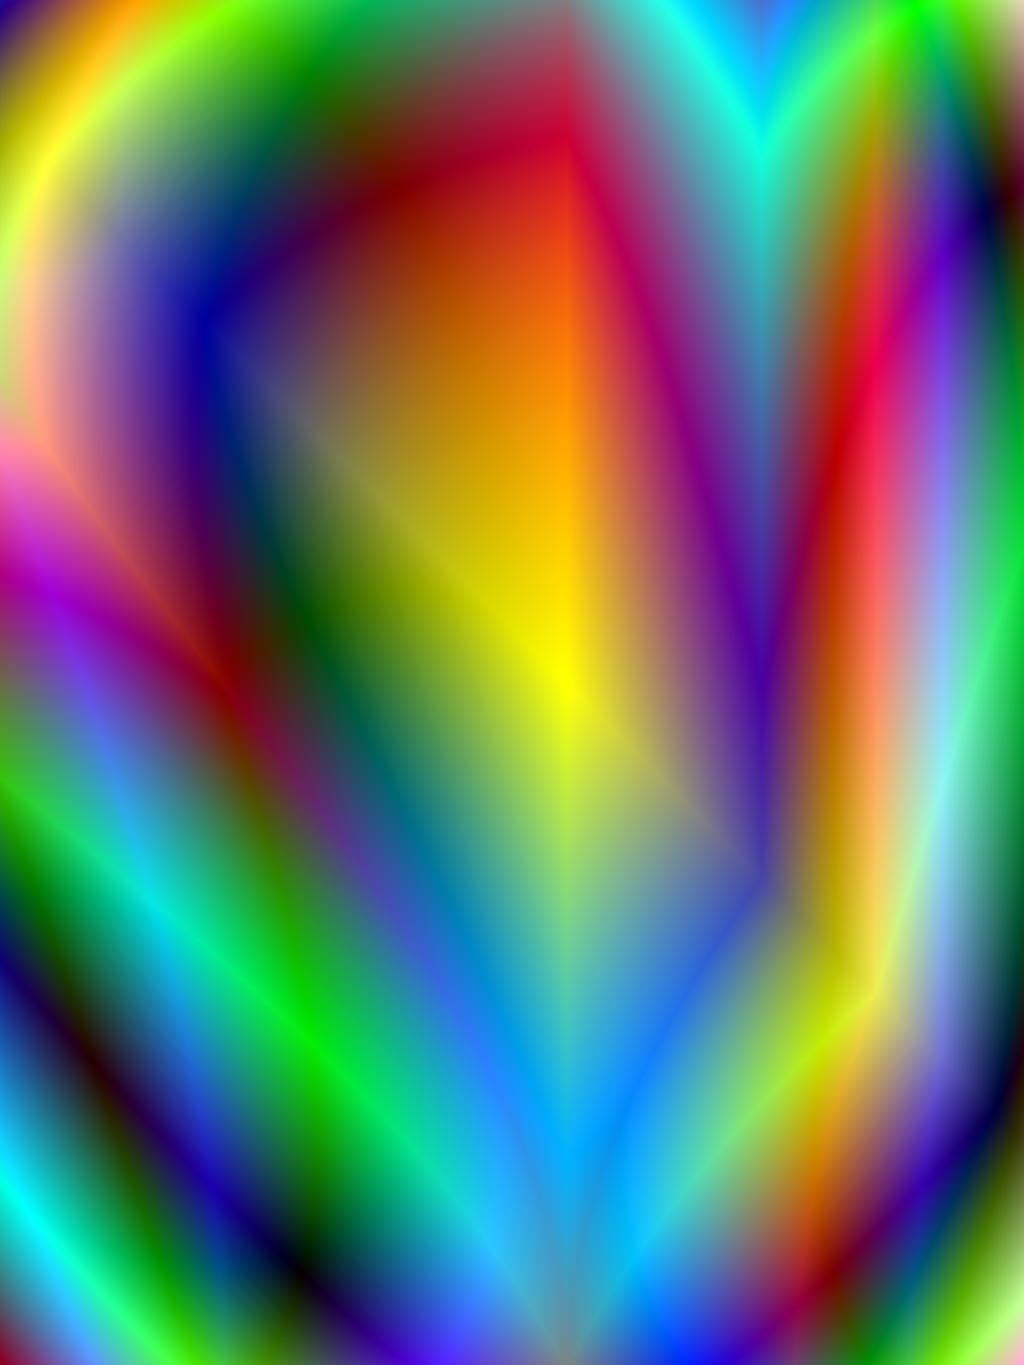 Crystal-like abstract structures in pure intensive colors; laser computer graphic by Wiesław Sadurski